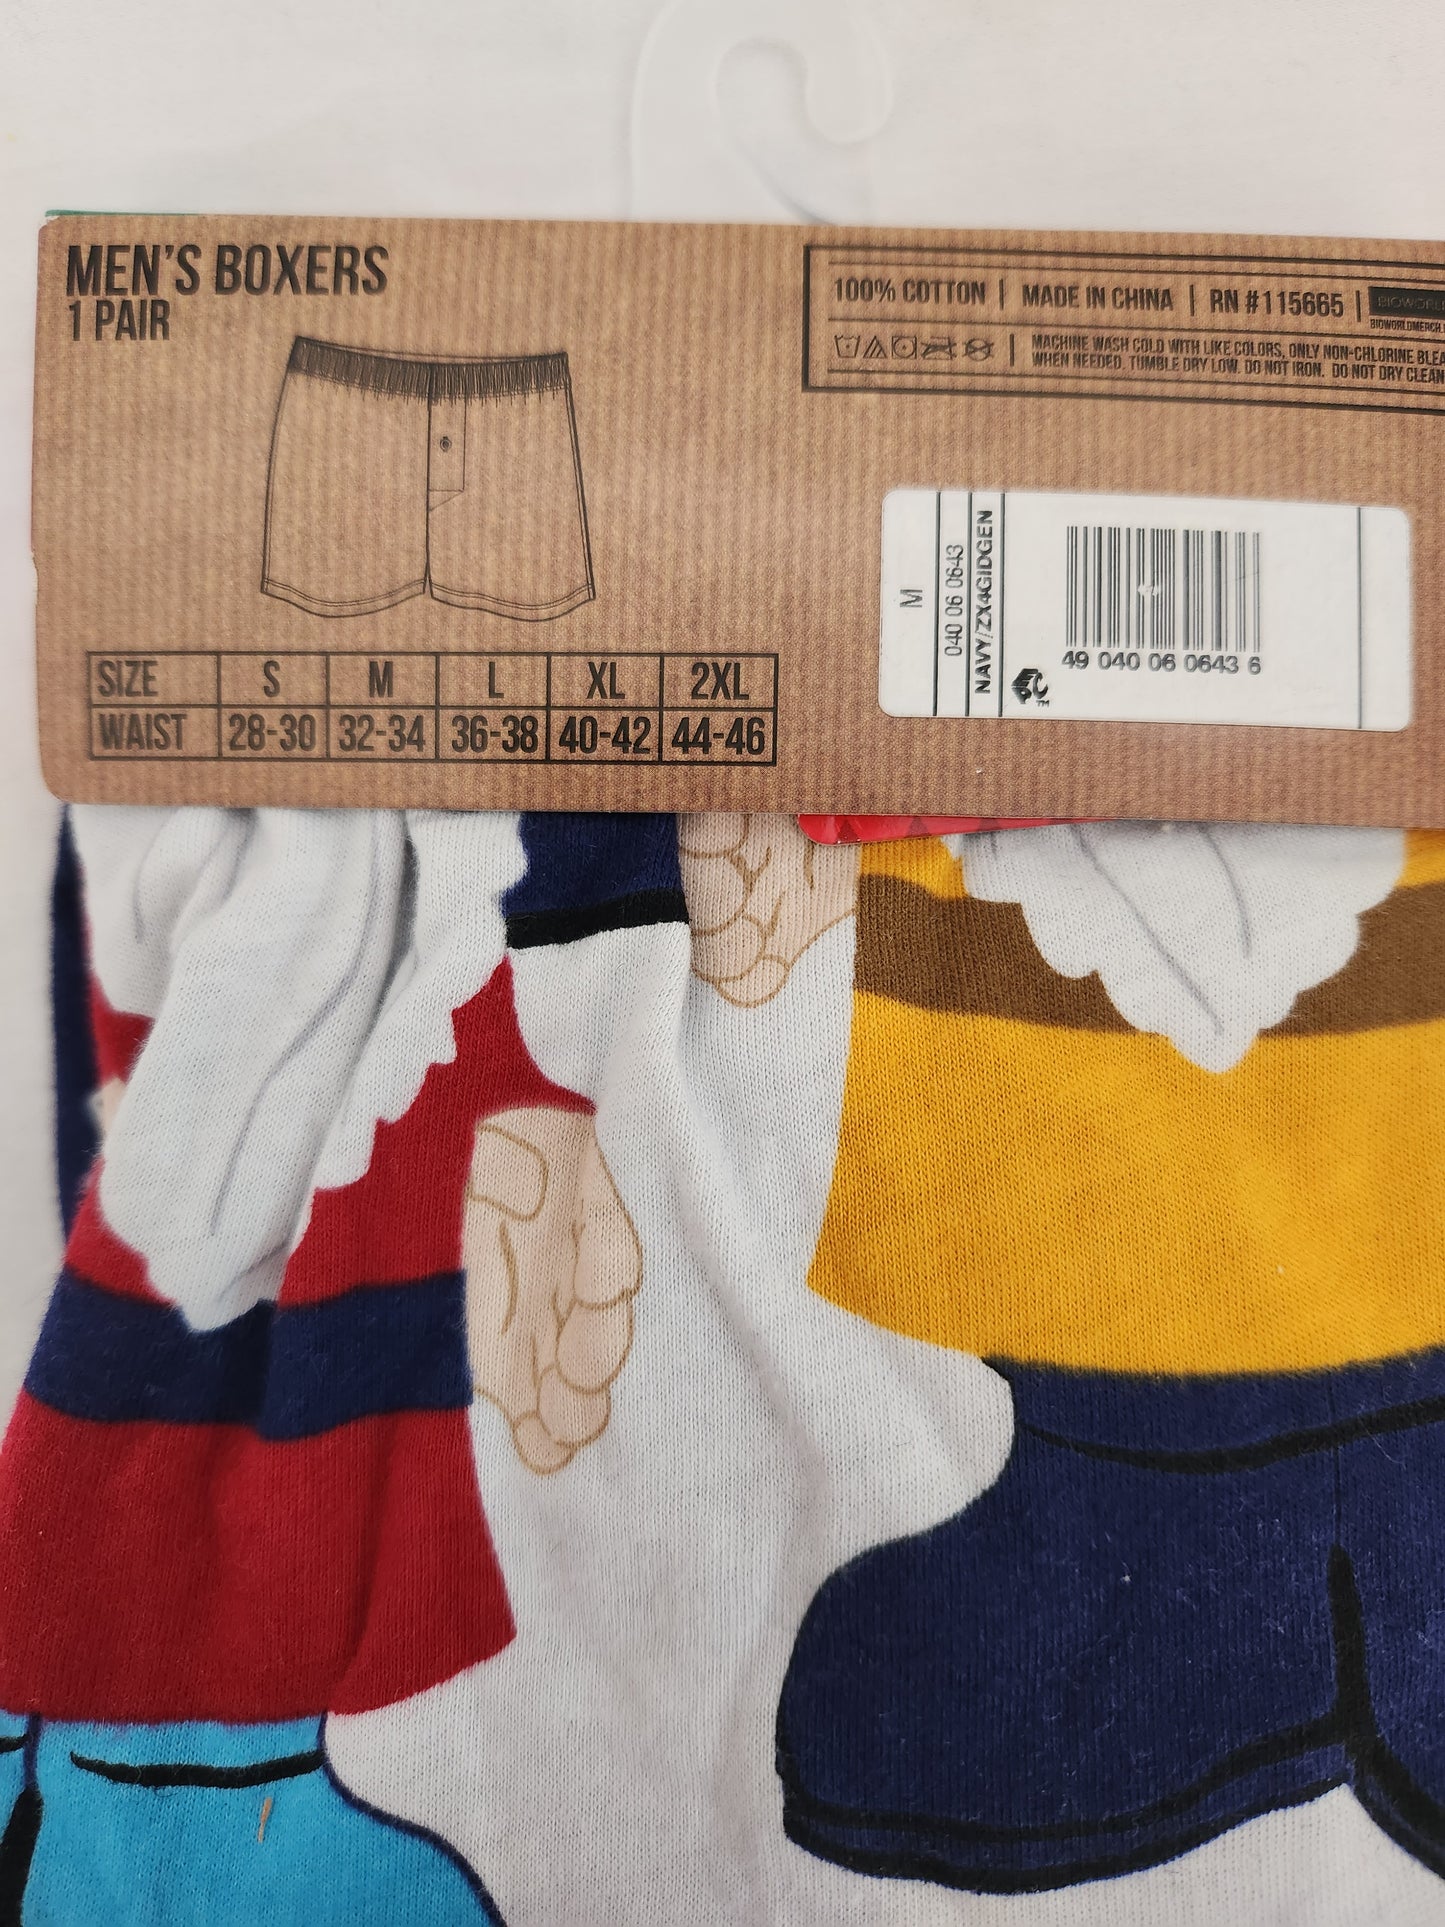 OMG so Ugly - Chillin' with my Gnomes Men's Holiday Boxers - Size: M (32-34)